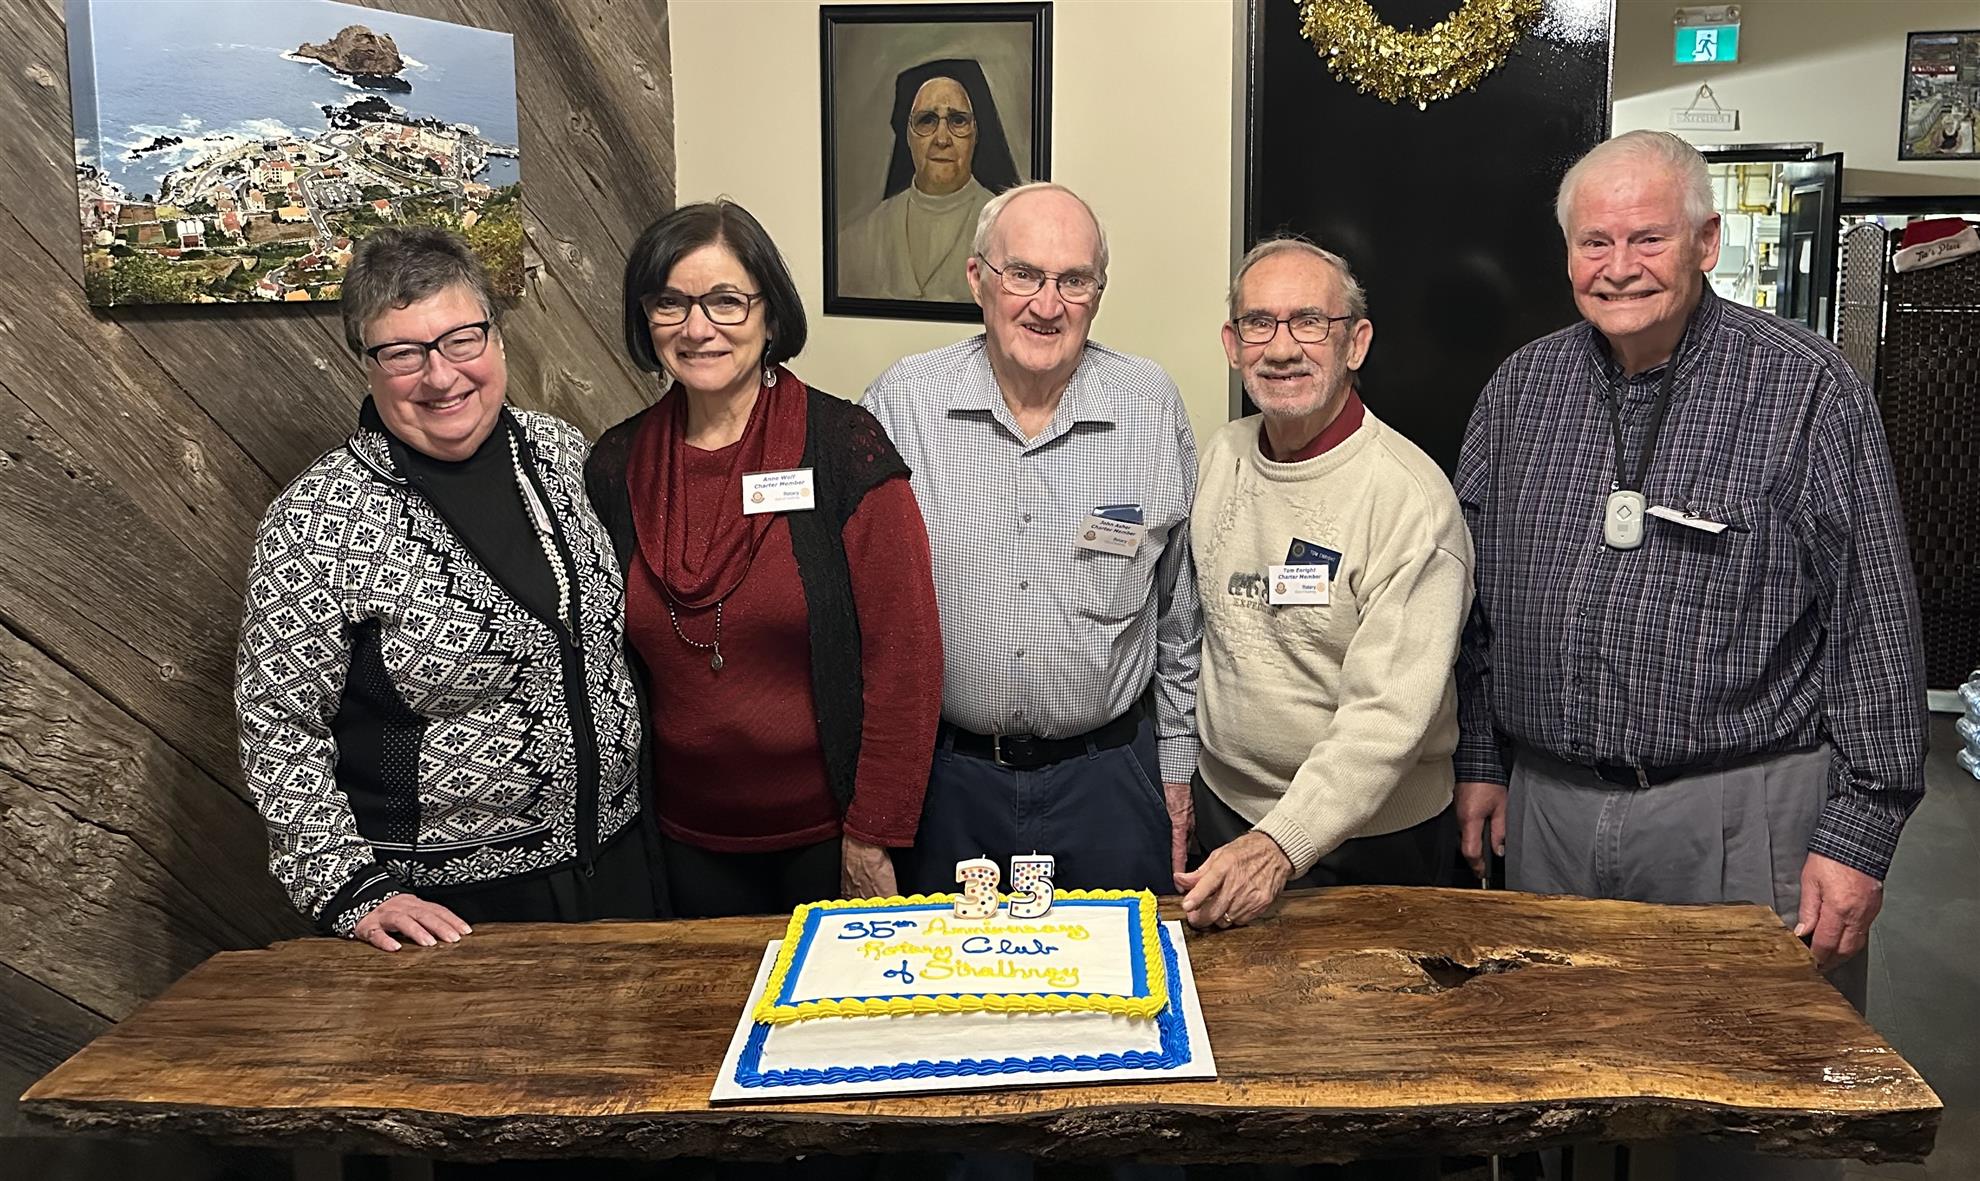 Several original charter members of the Strathroy Rotary Club pose for a photo in front of a cake commemorating the 35th anniversary of our charter.